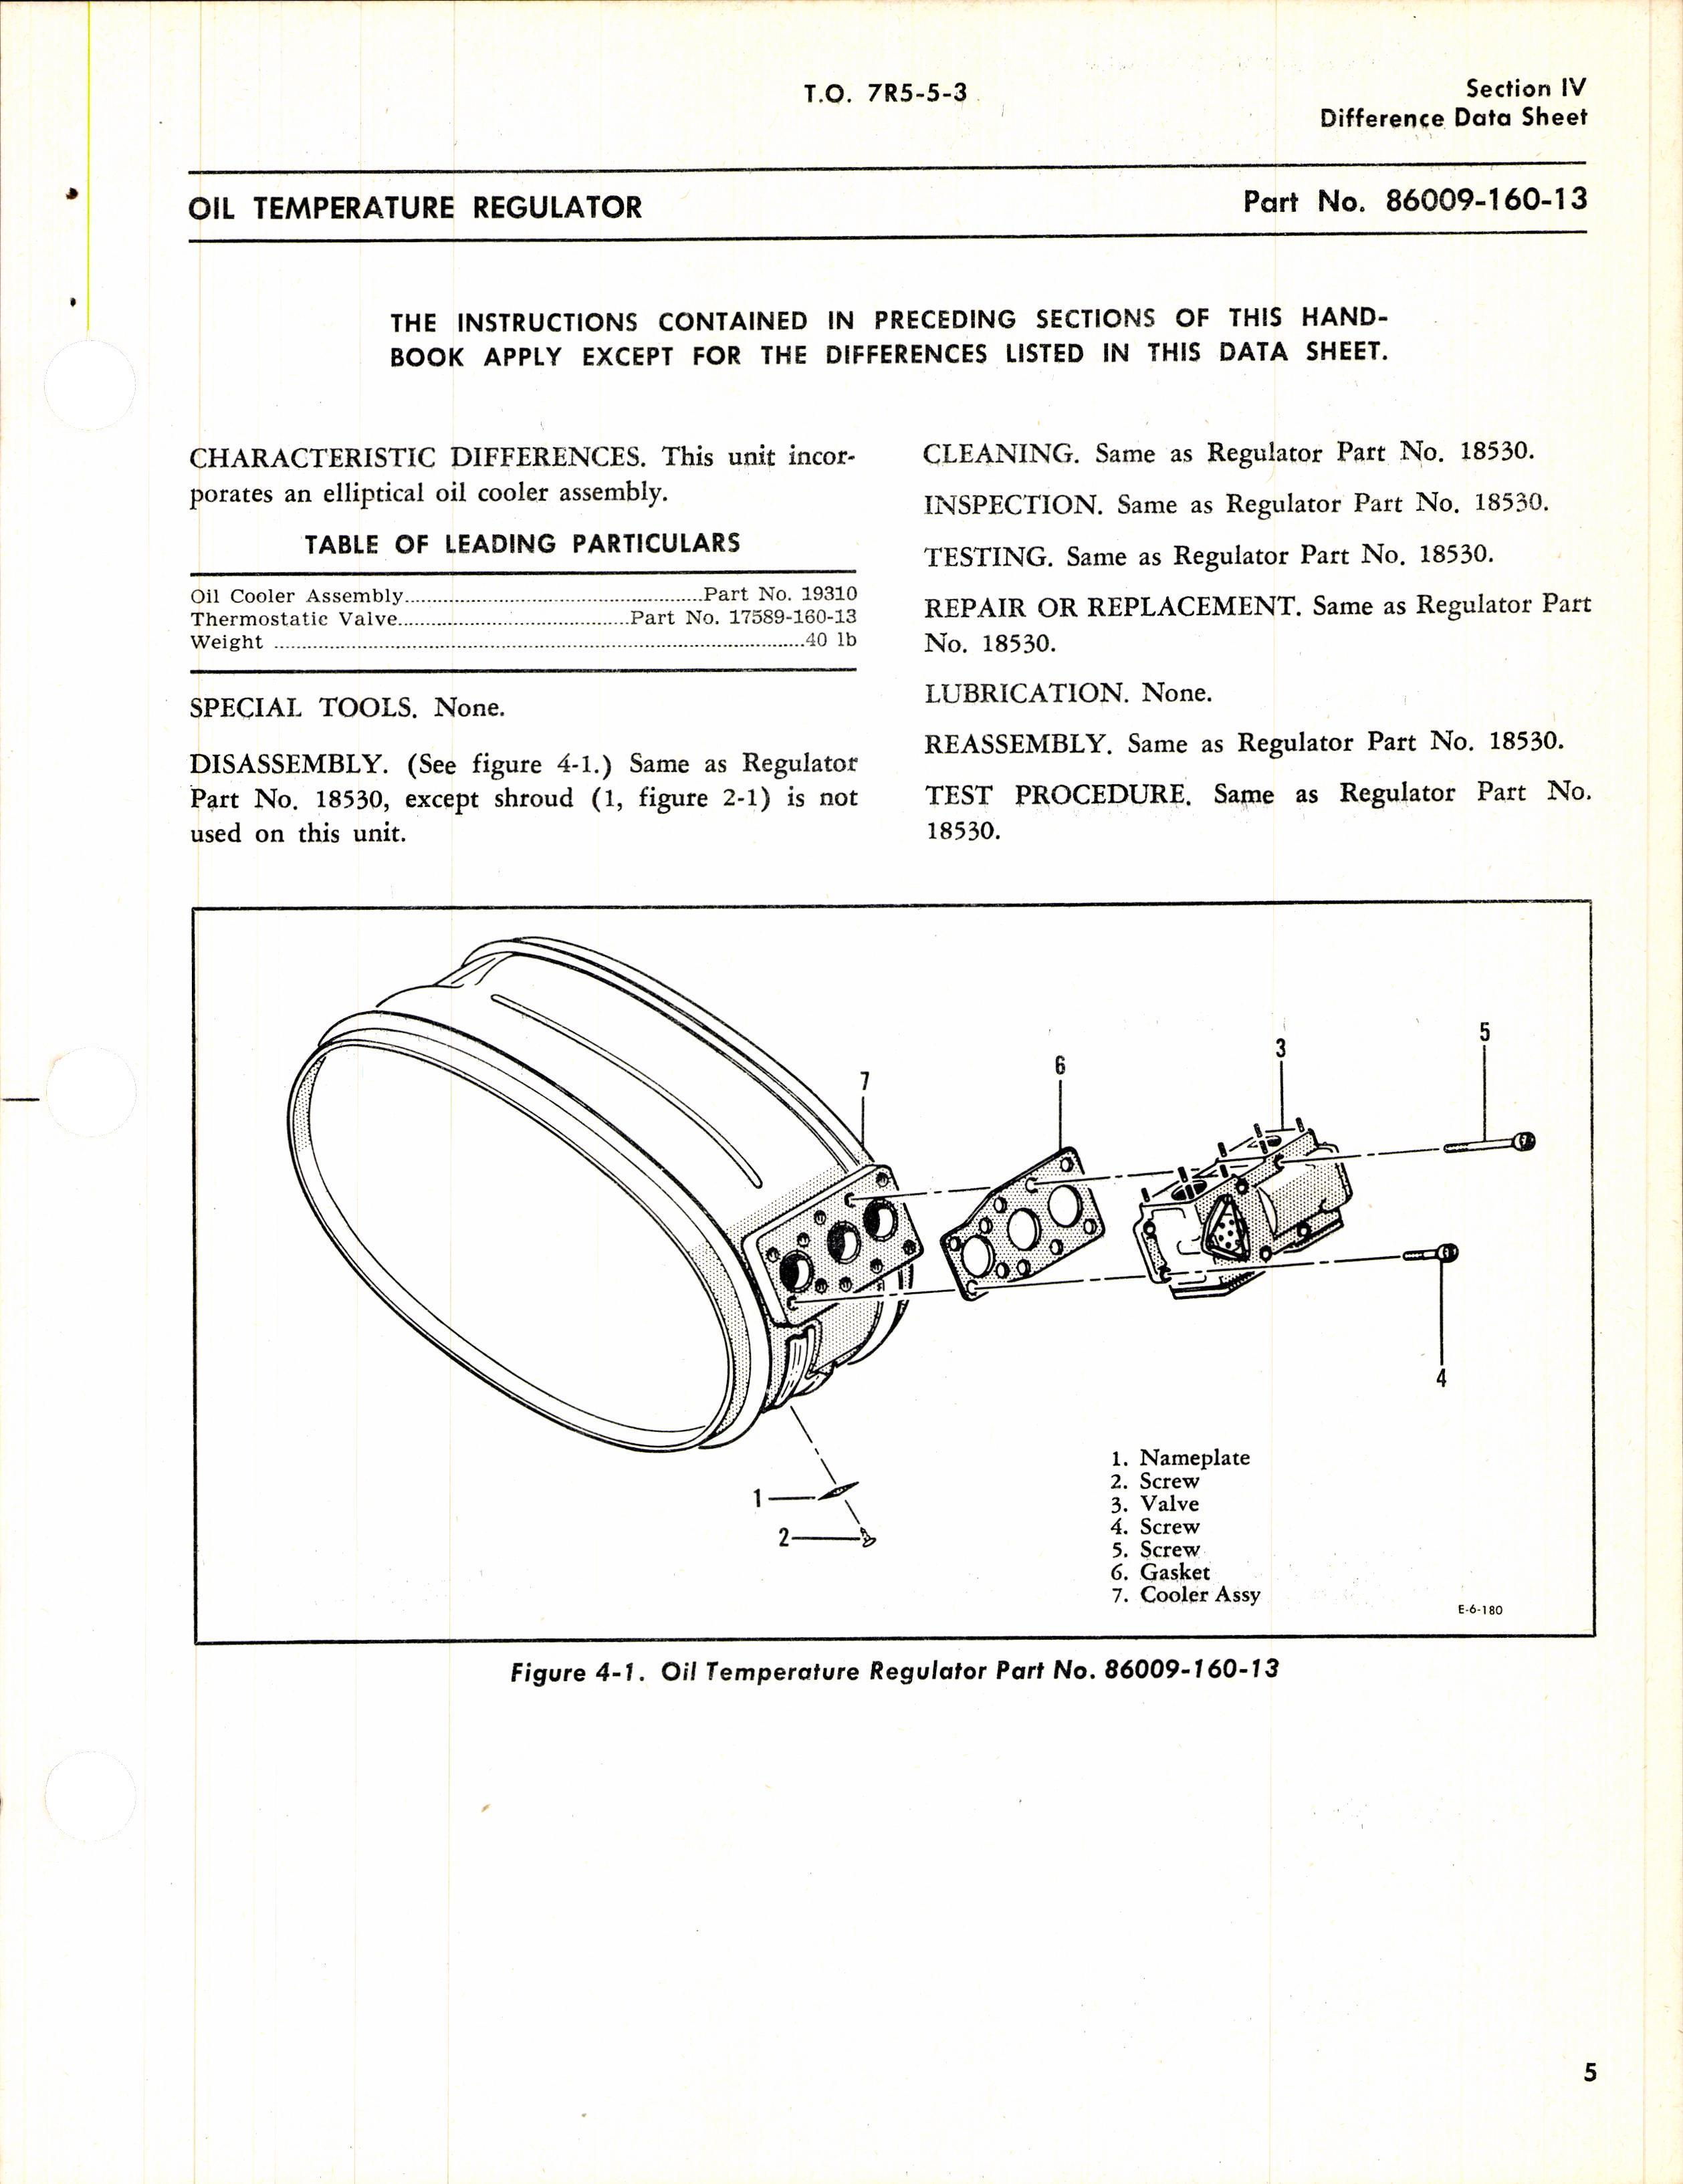 Sample page 7 from AirCorps Library document: Overhaul Instructions for Airesearch Oil Temperature Regulators 